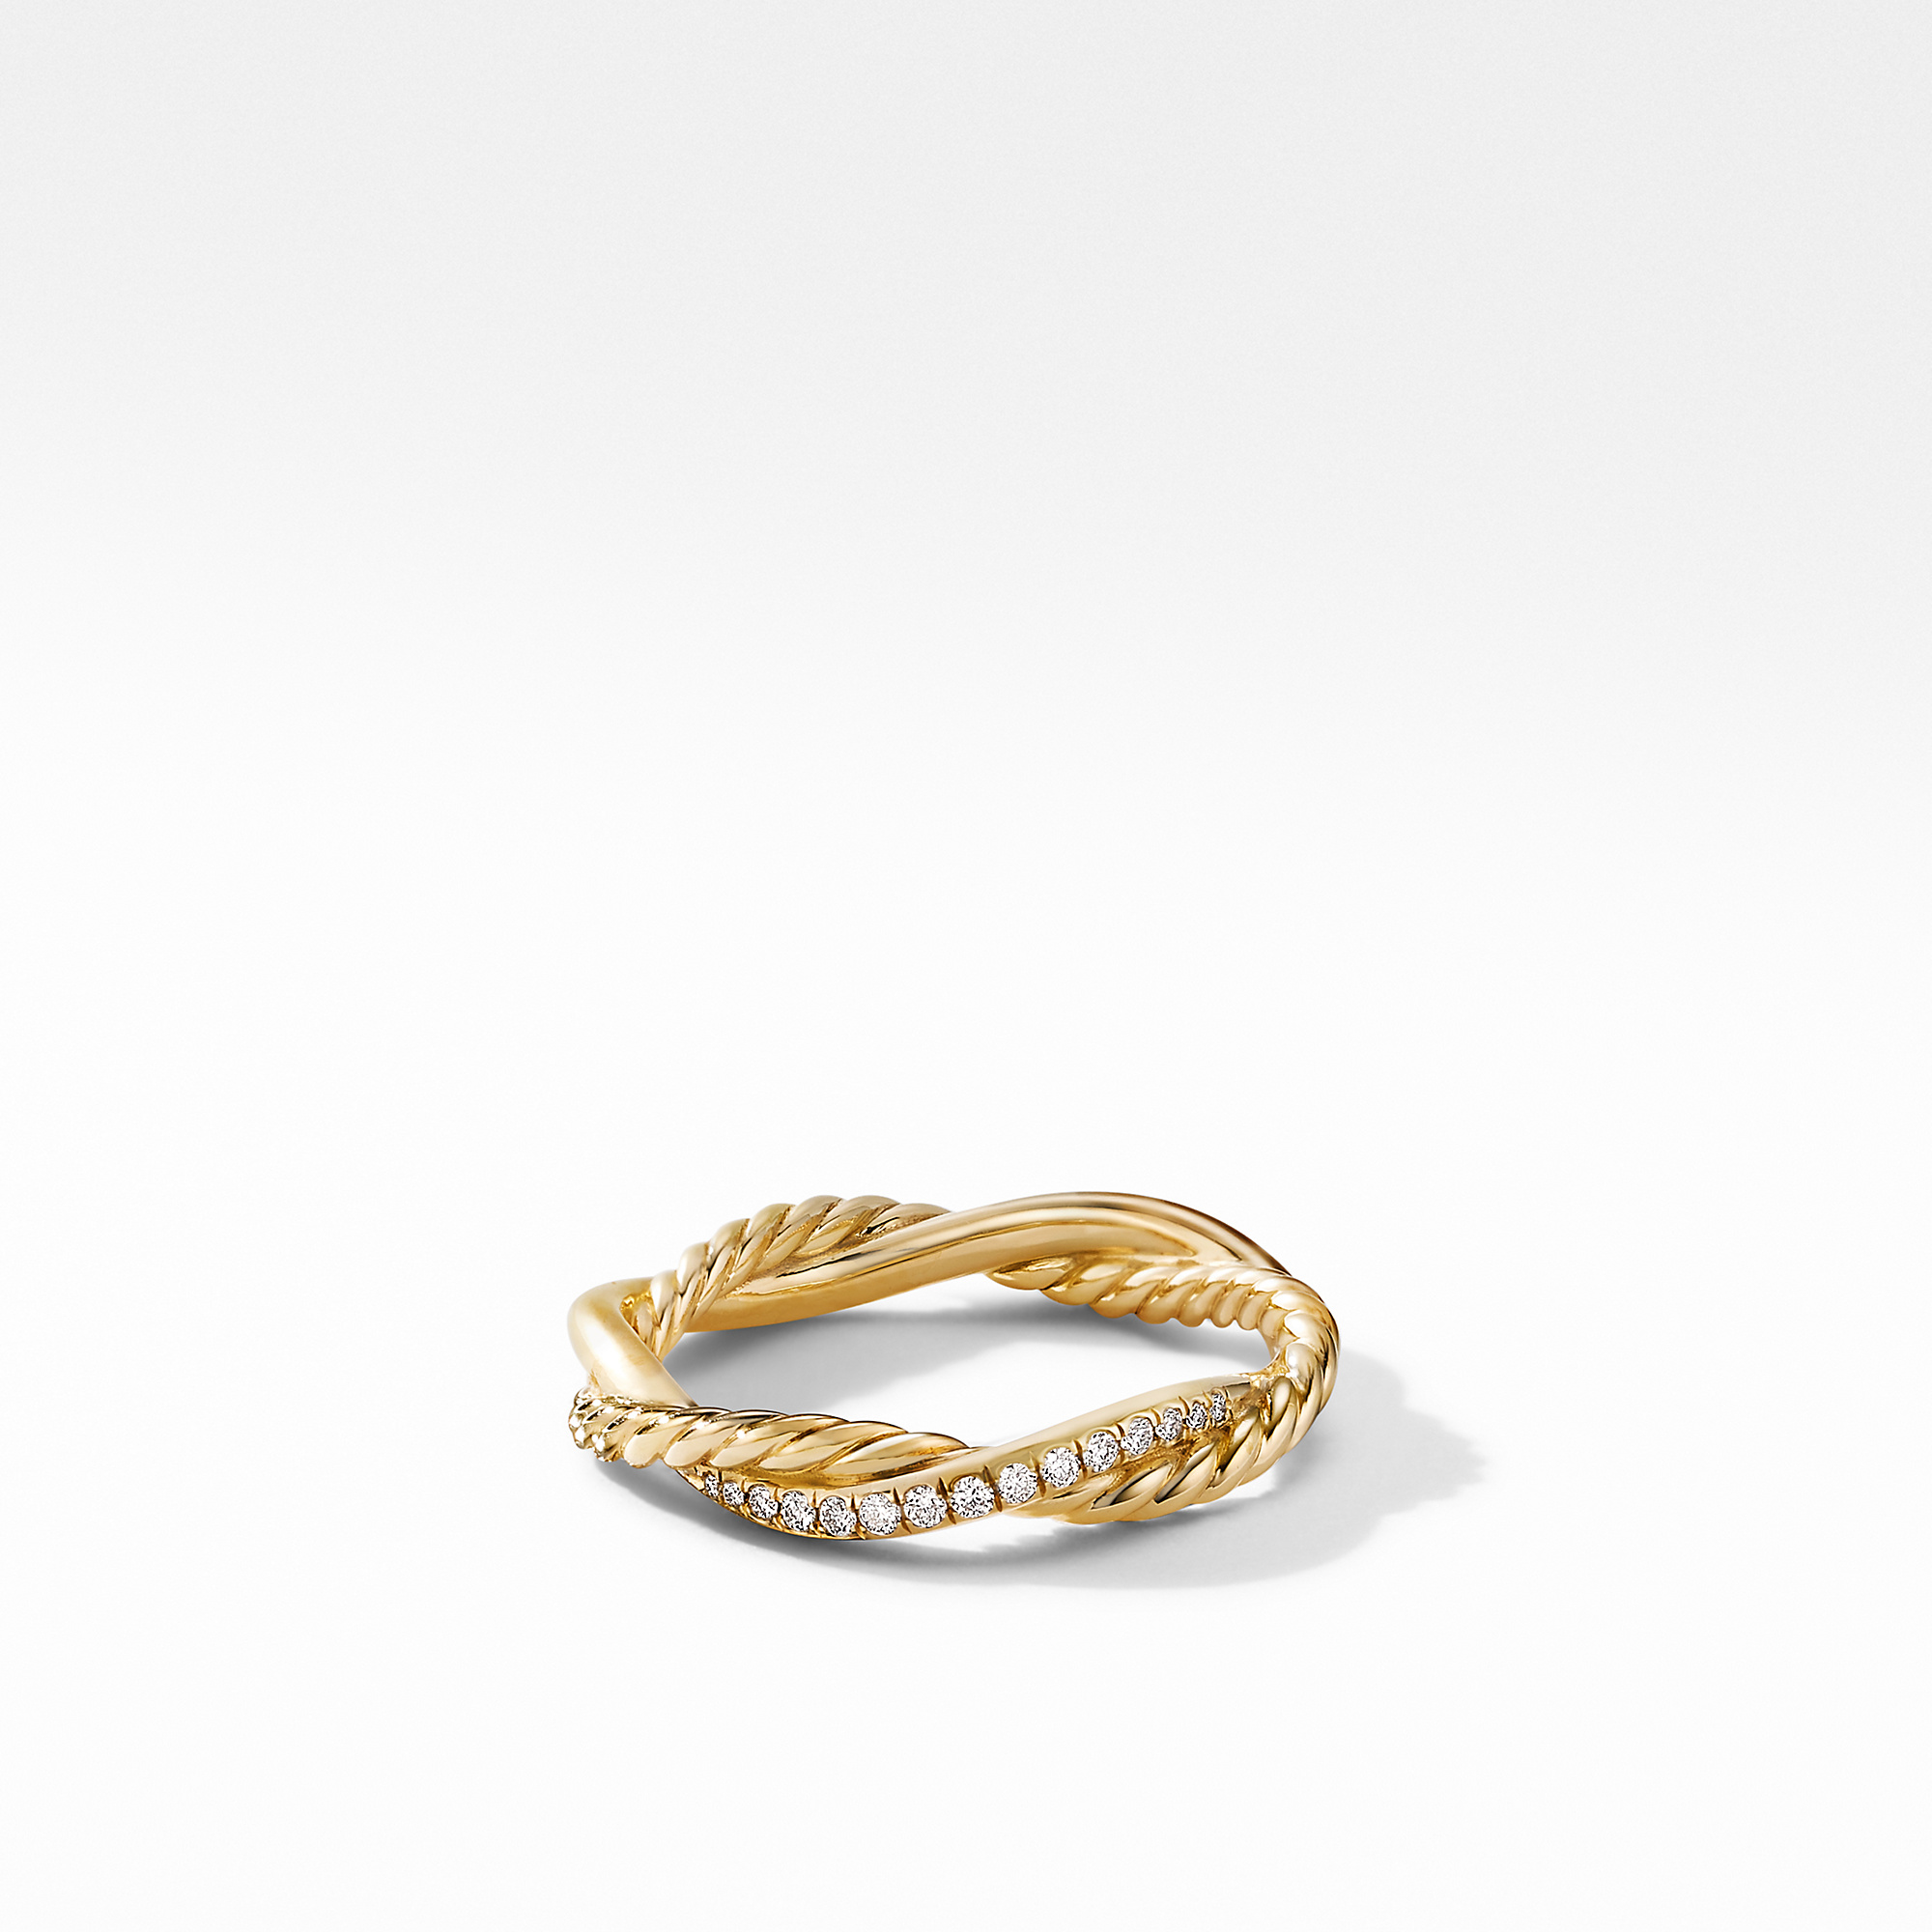 Petite Infinity Band Ring in 18K Yellow Gold with Pave Diamonds